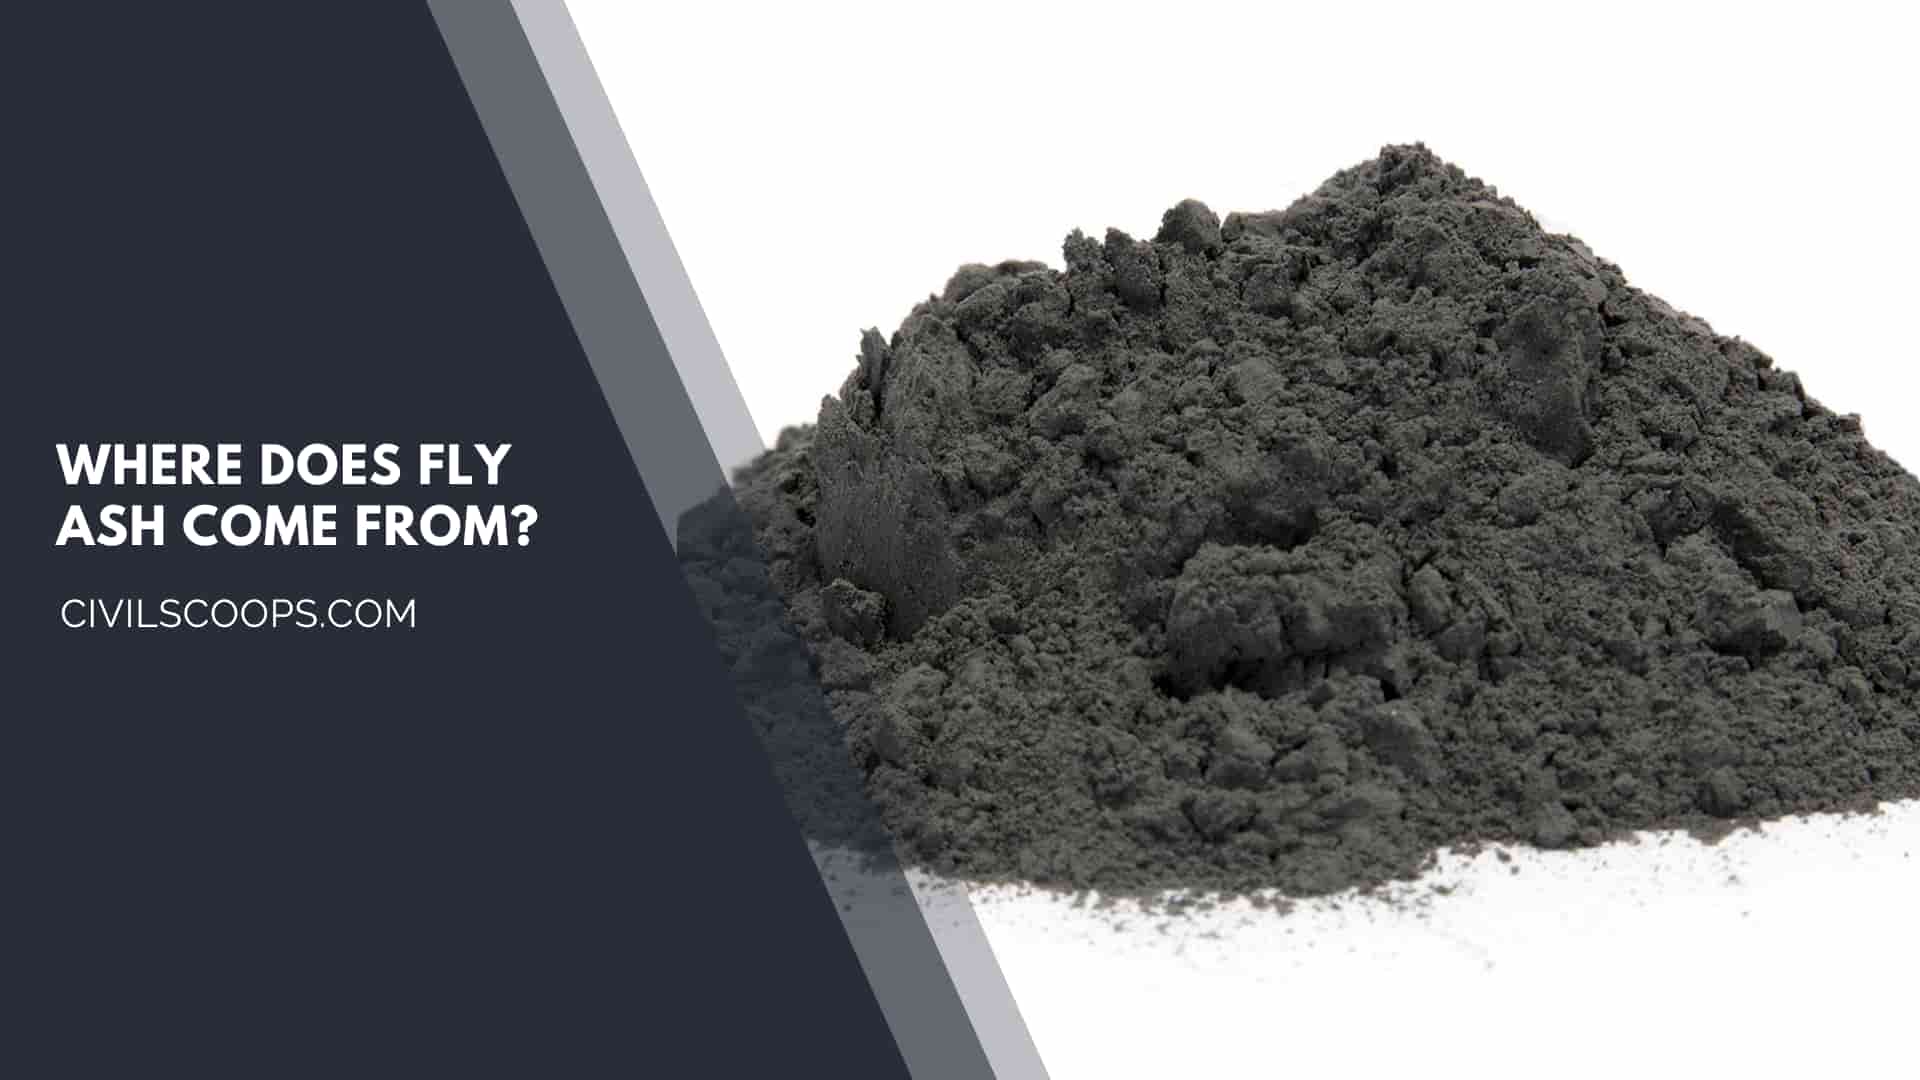 Where Does Fly Ash Come From?